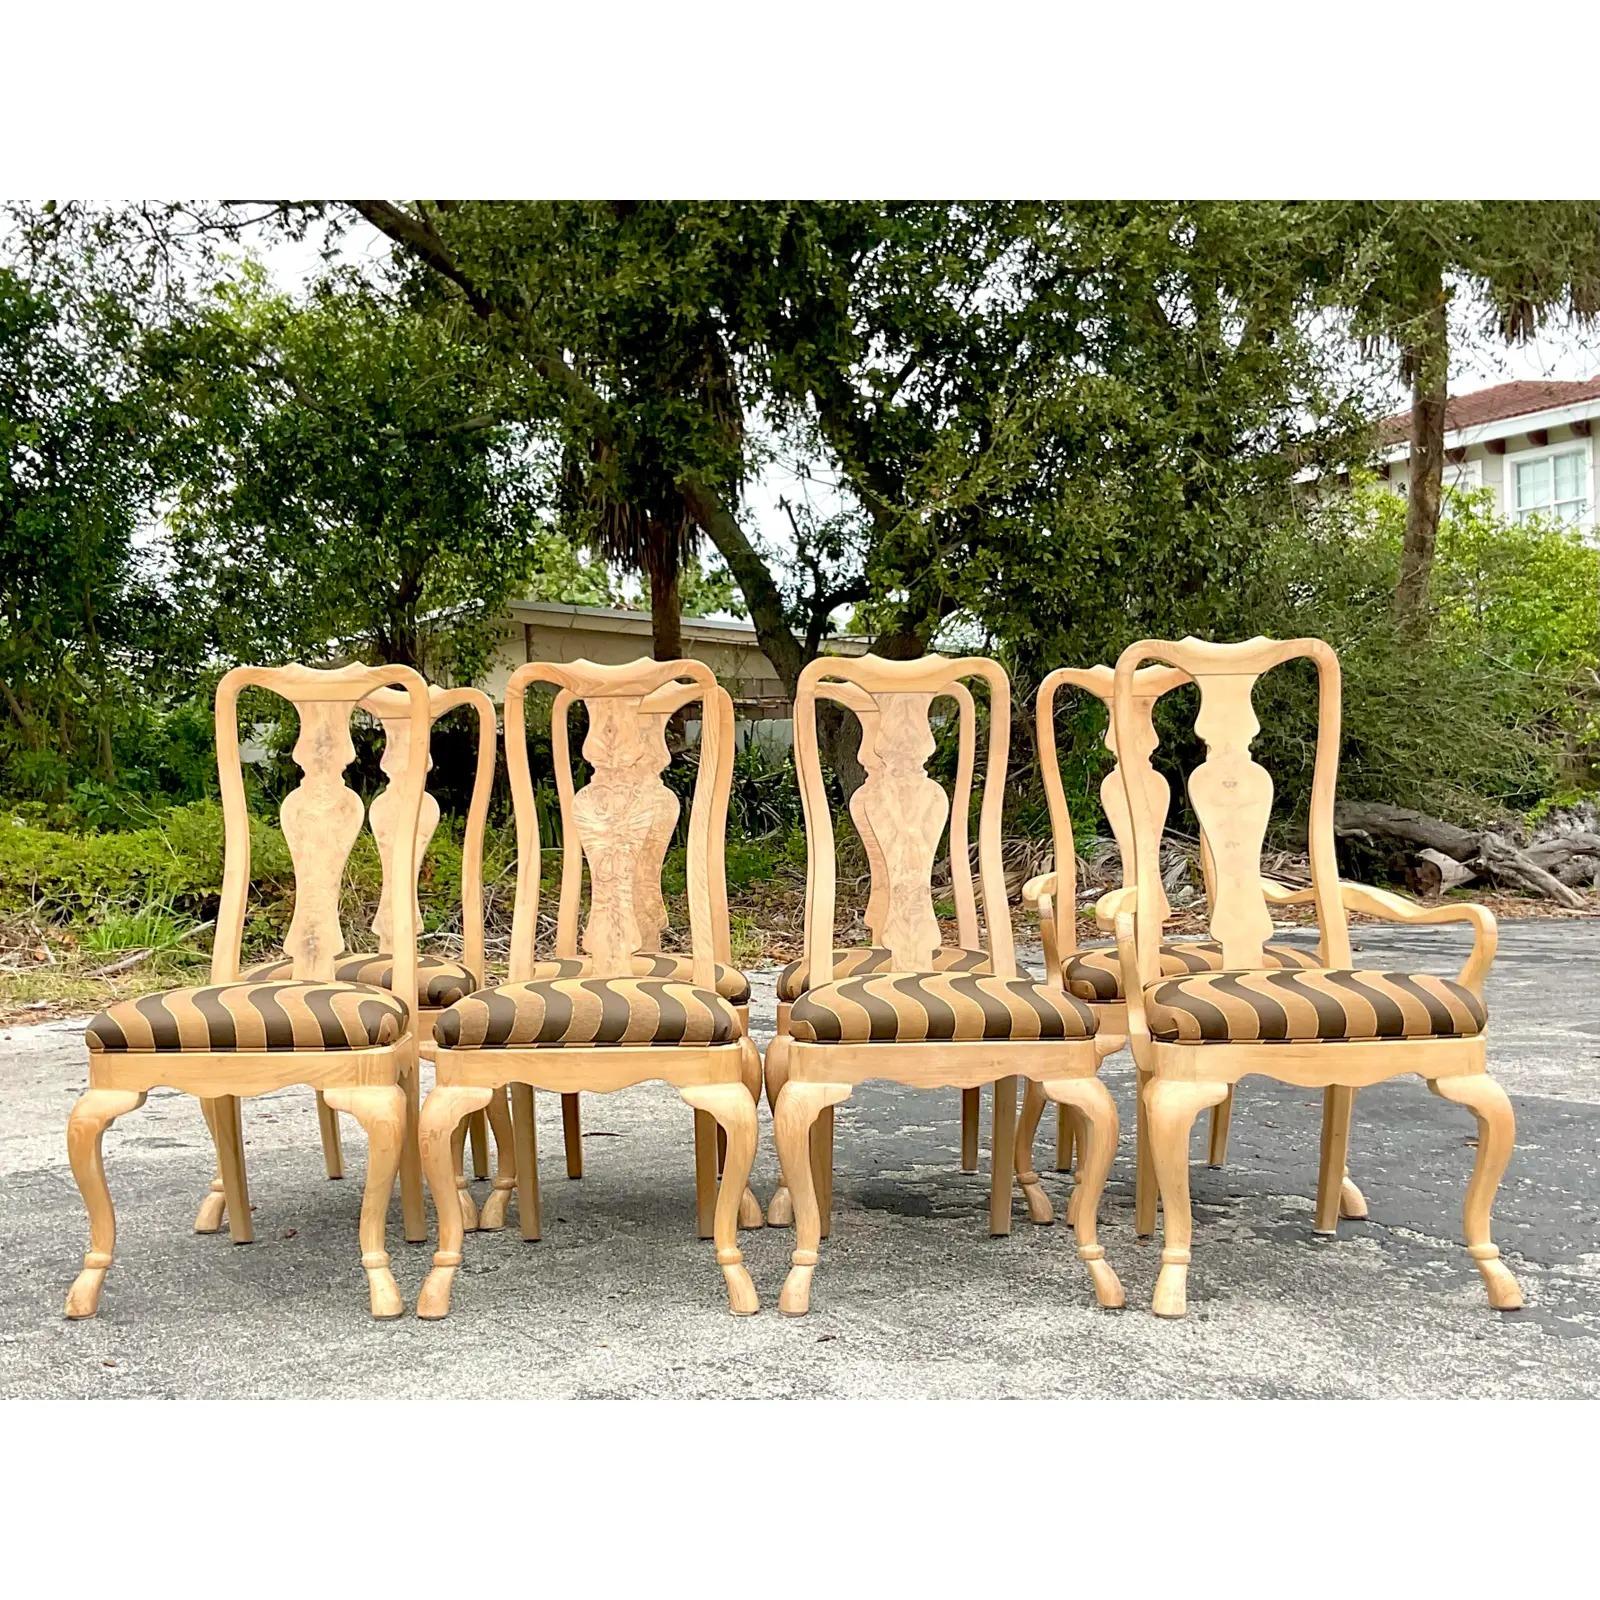 An outstanding set of 8 vintage Regency dining chairs. Chic high backs and carved cabriolet legs. Beautiful Burl wood grain detail. A wavy jacquard with a touch of lurex. Acquired from a Palm Beach estate.

armchair width 23.5